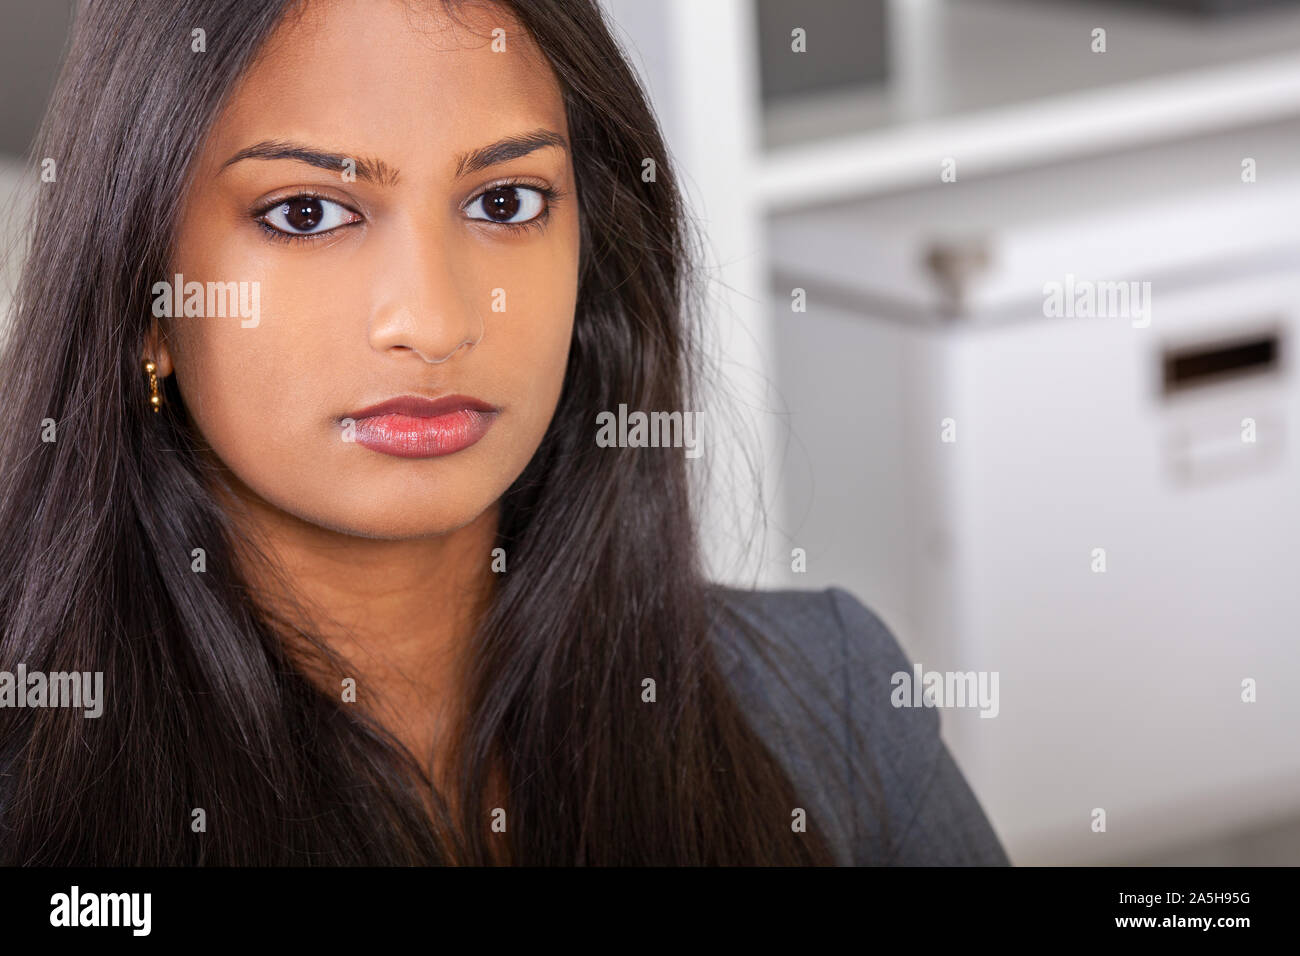 https://c8.alamy.com/comp/2A5H95G/portrait-of-a-beautiful-thoughtful-young-successful-female-asian-indian-business-woman-or-businesswoman-in-office-2A5H95G.jpg